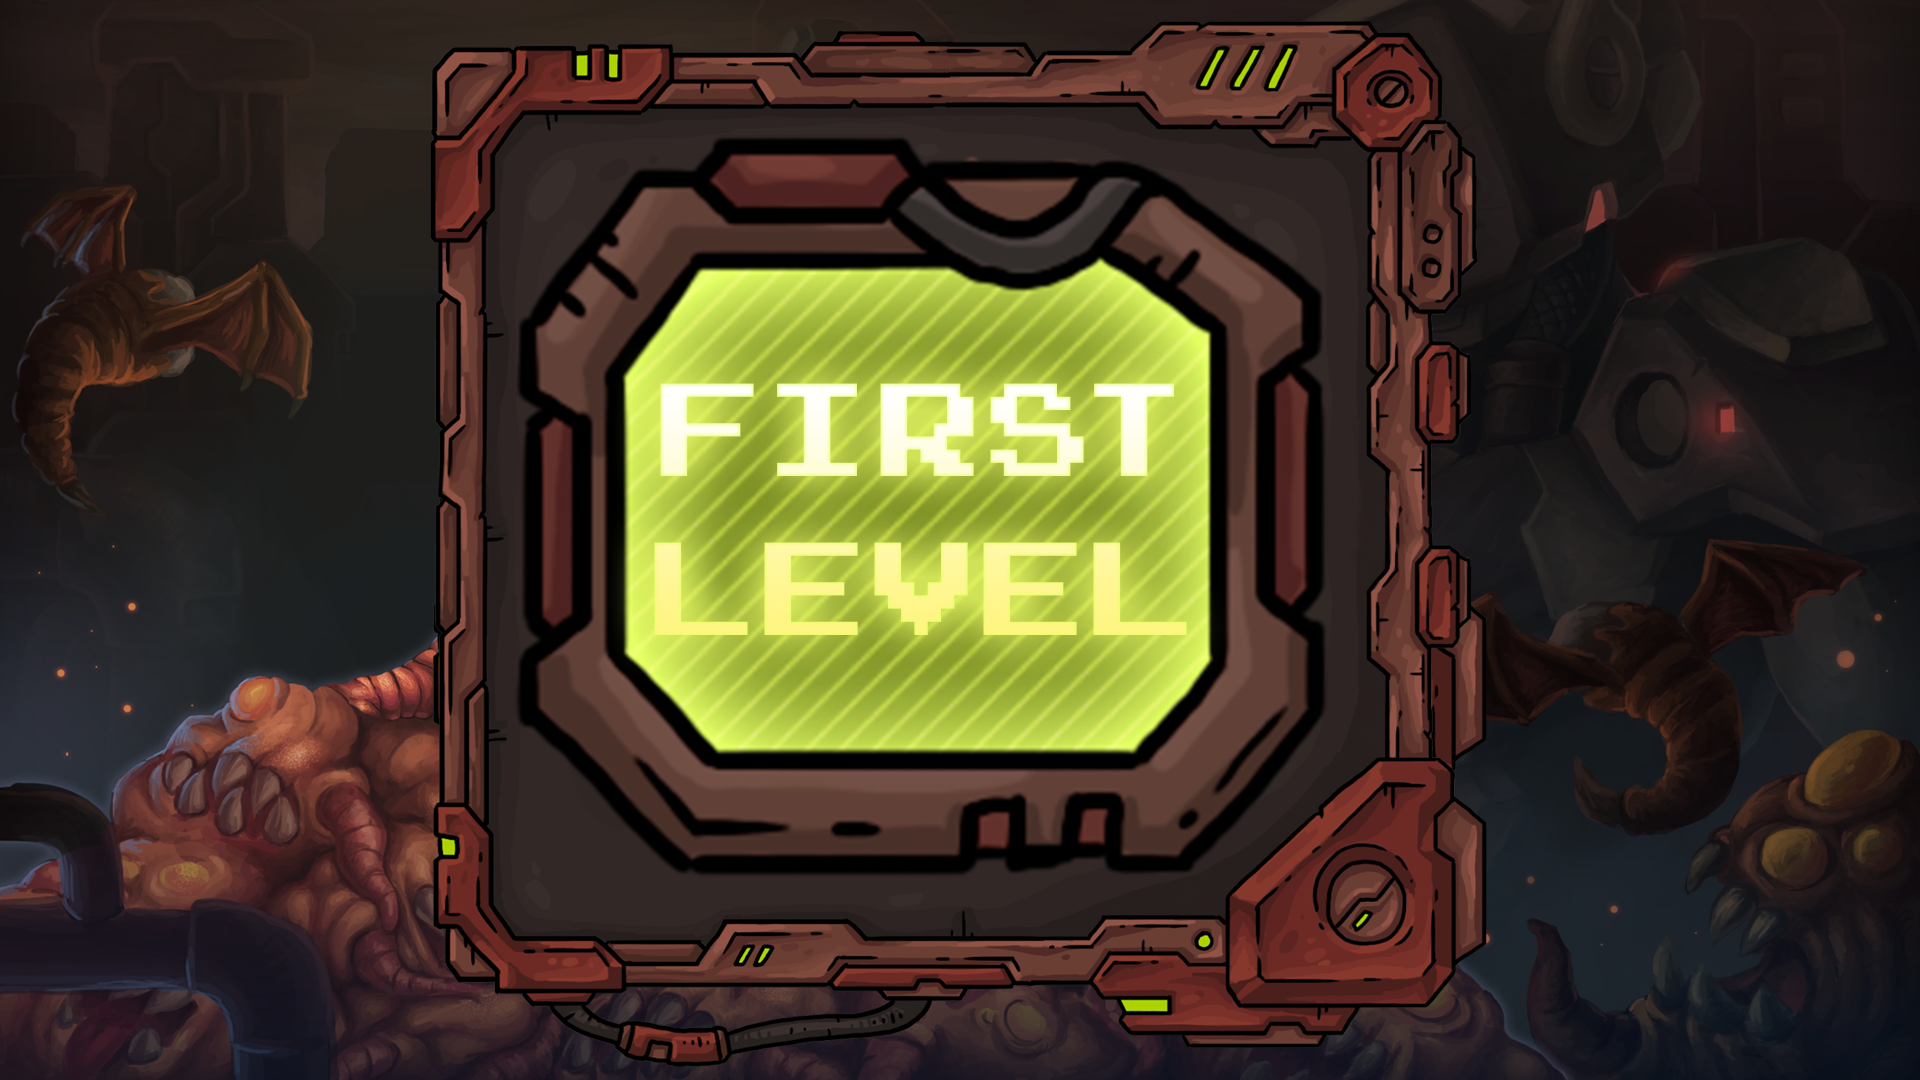 Icon for Level dONE